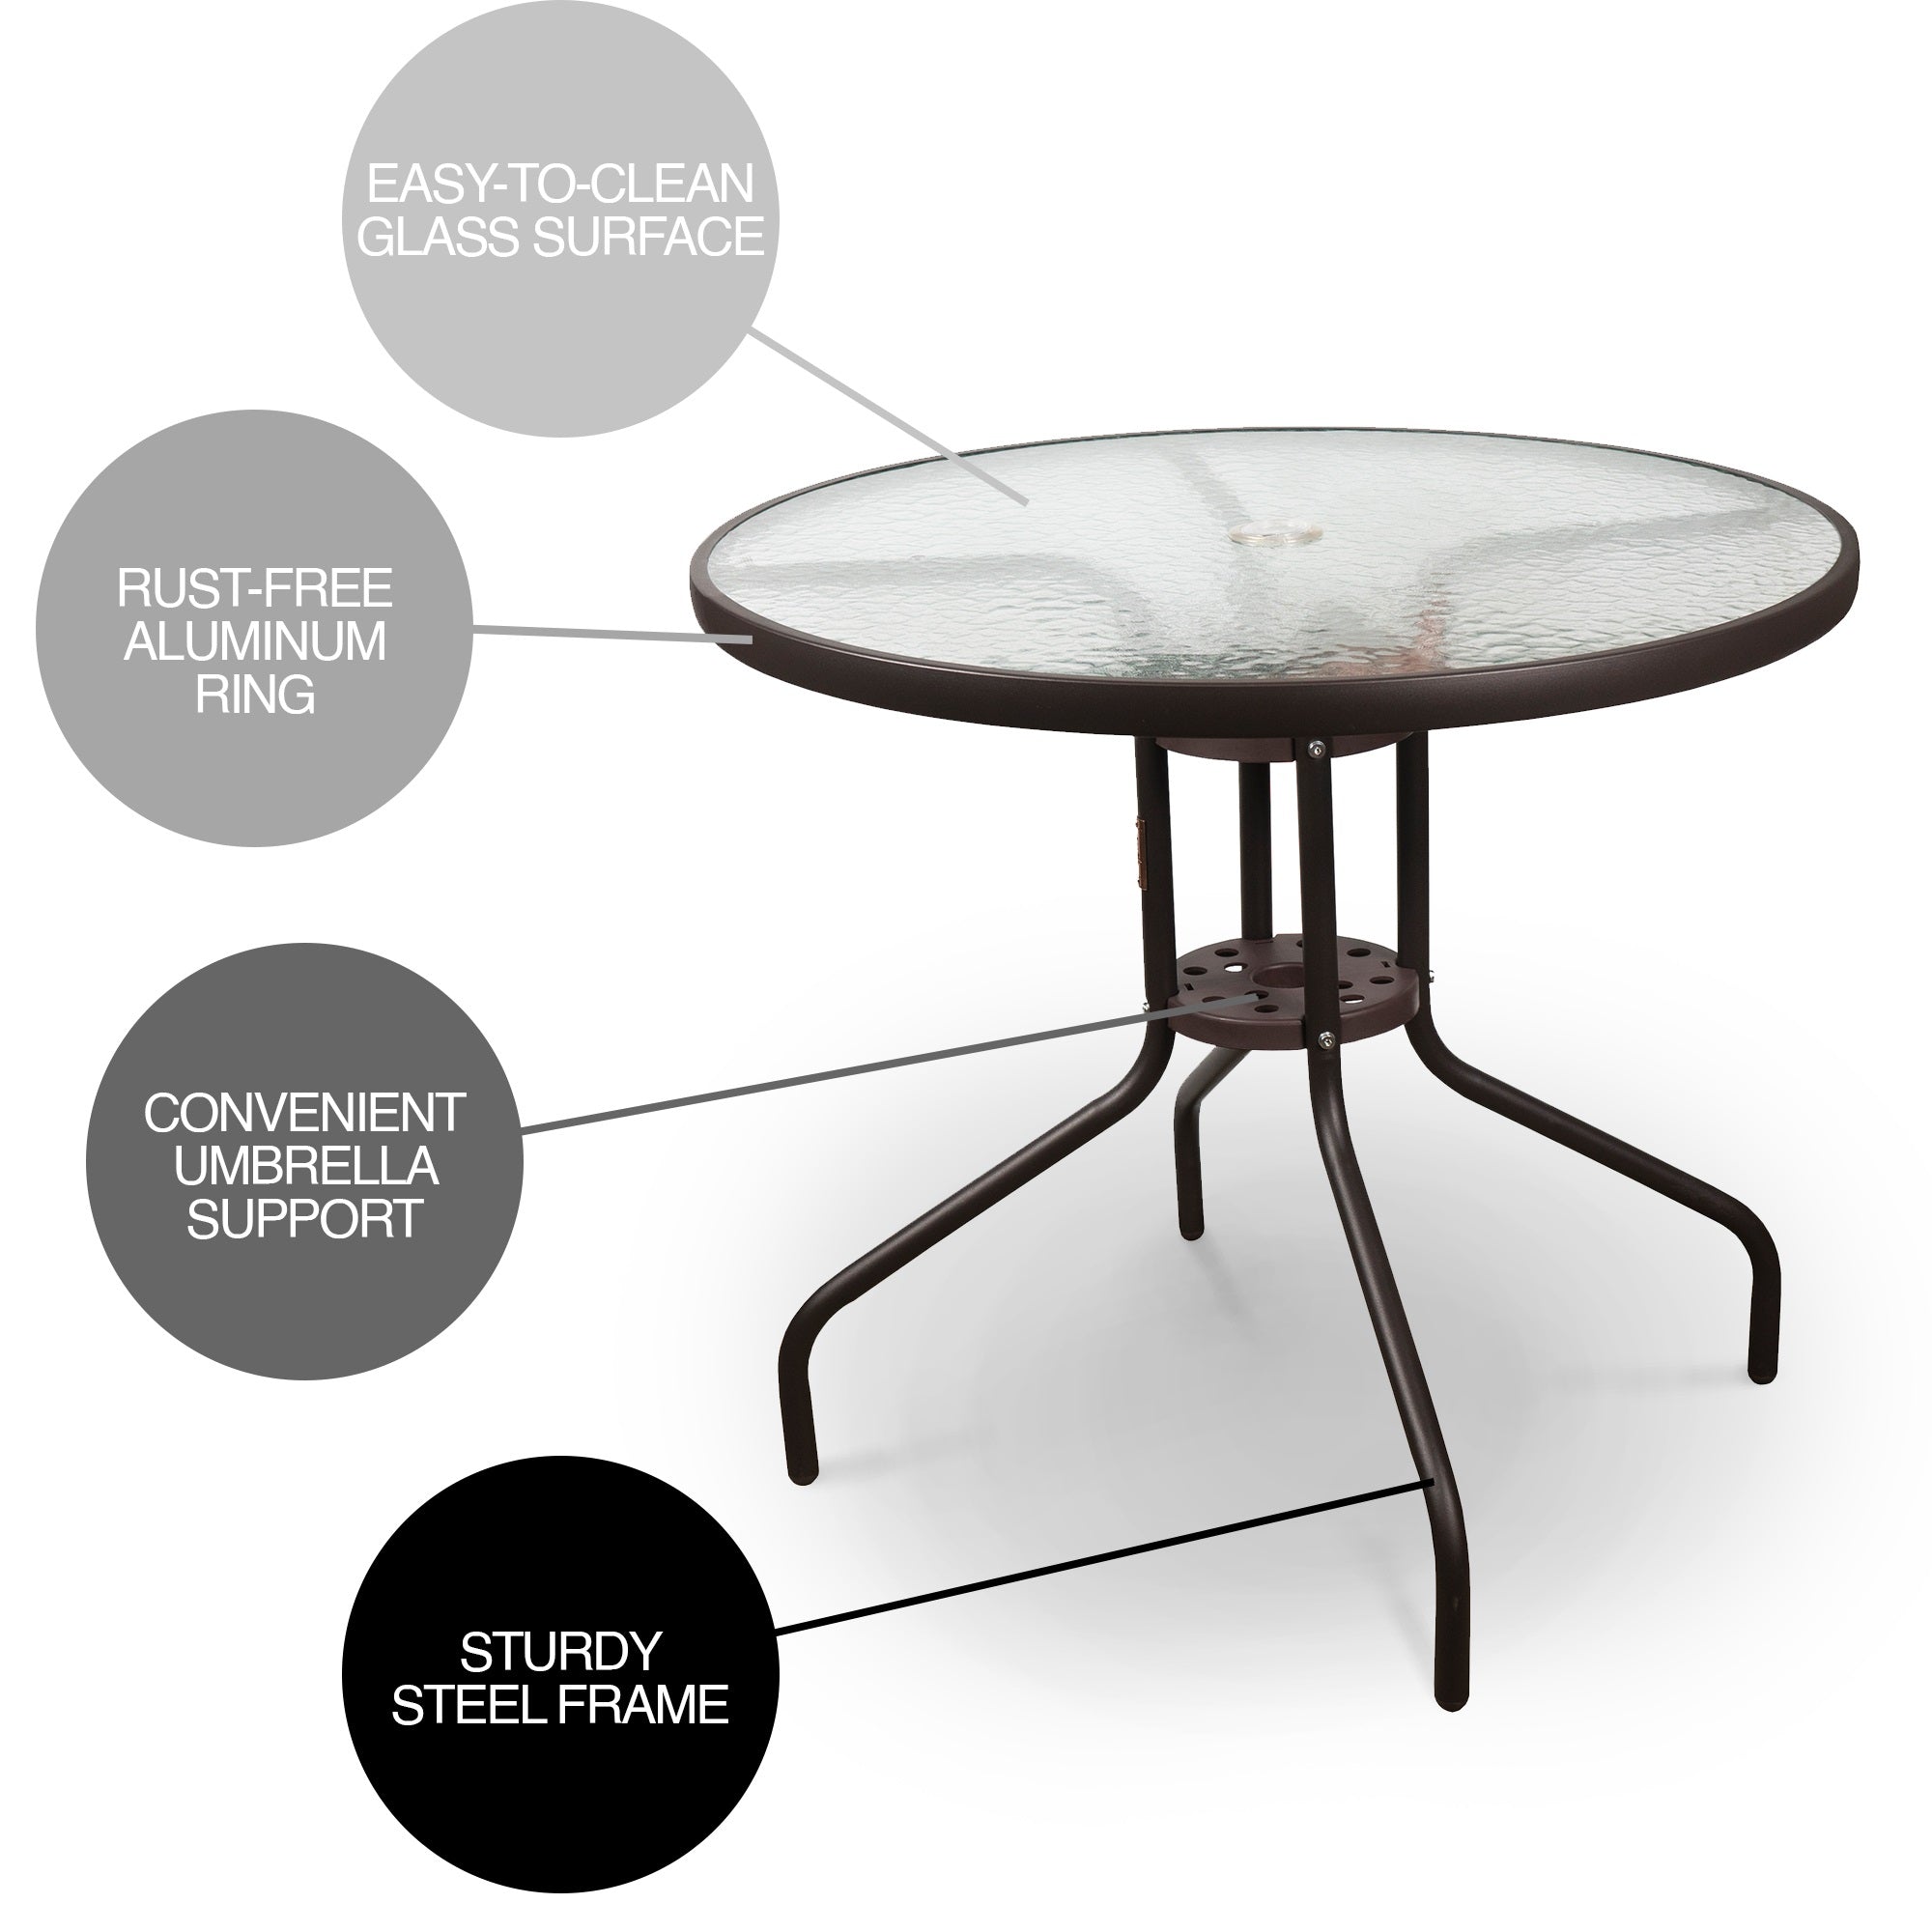 Garden Elements Outdoor Dining Table Patio Furniture, Round Steel Base and Rim with Waterwave Glass Top, Brown 31.5"